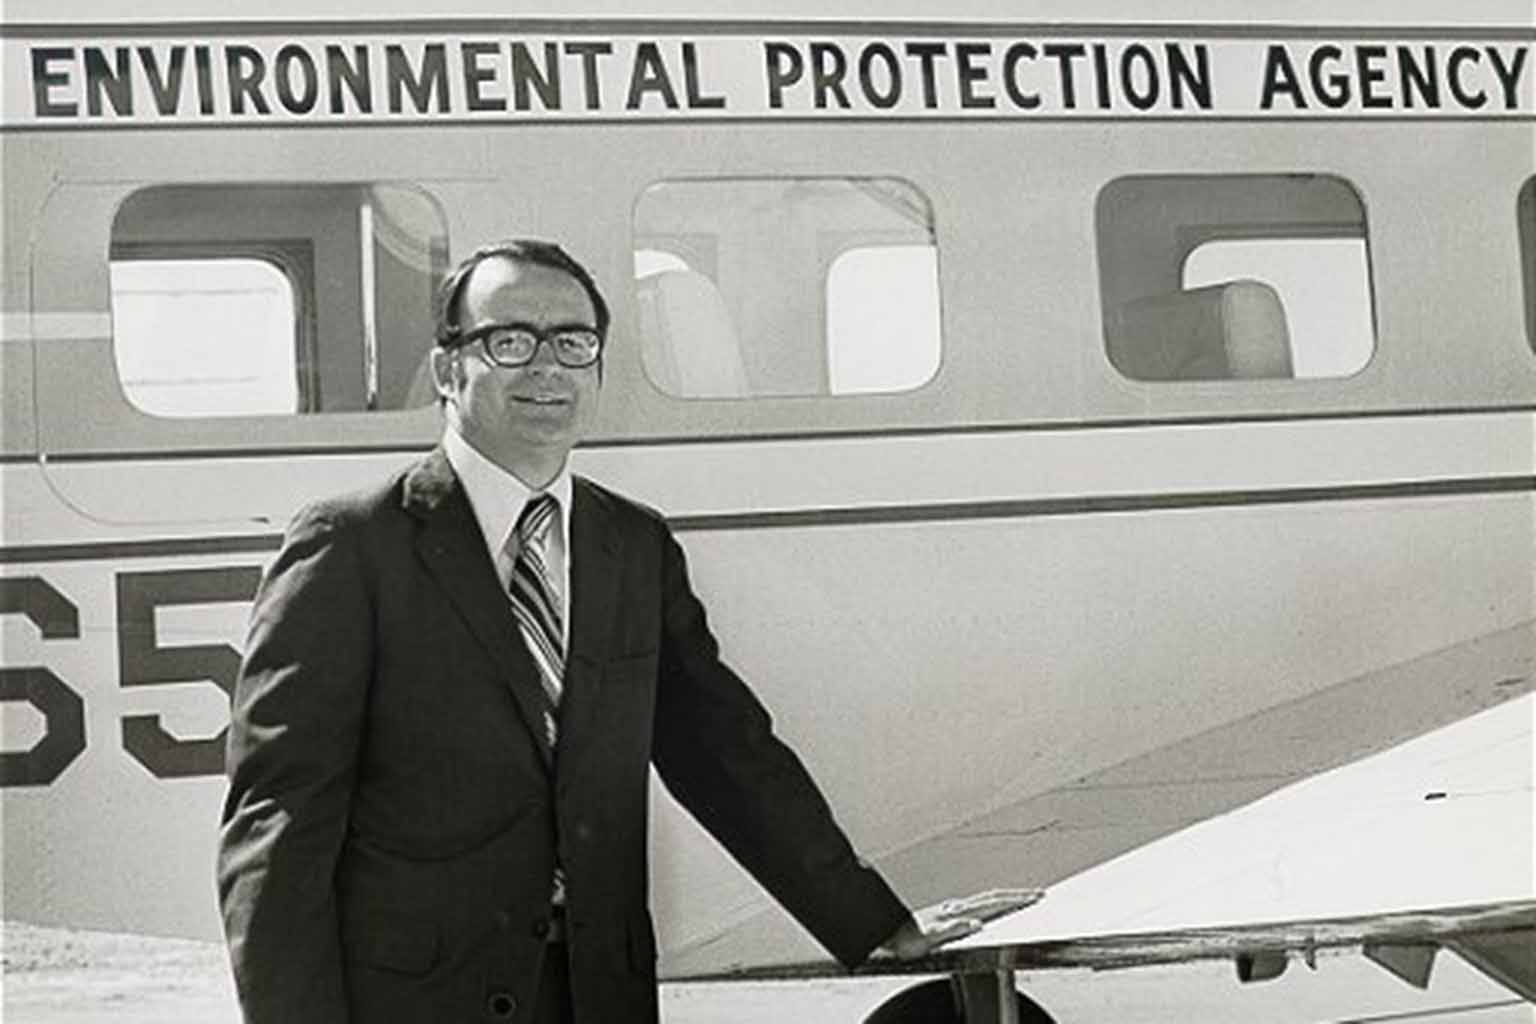 William D. Ruckelshaus in front of the EPA plane